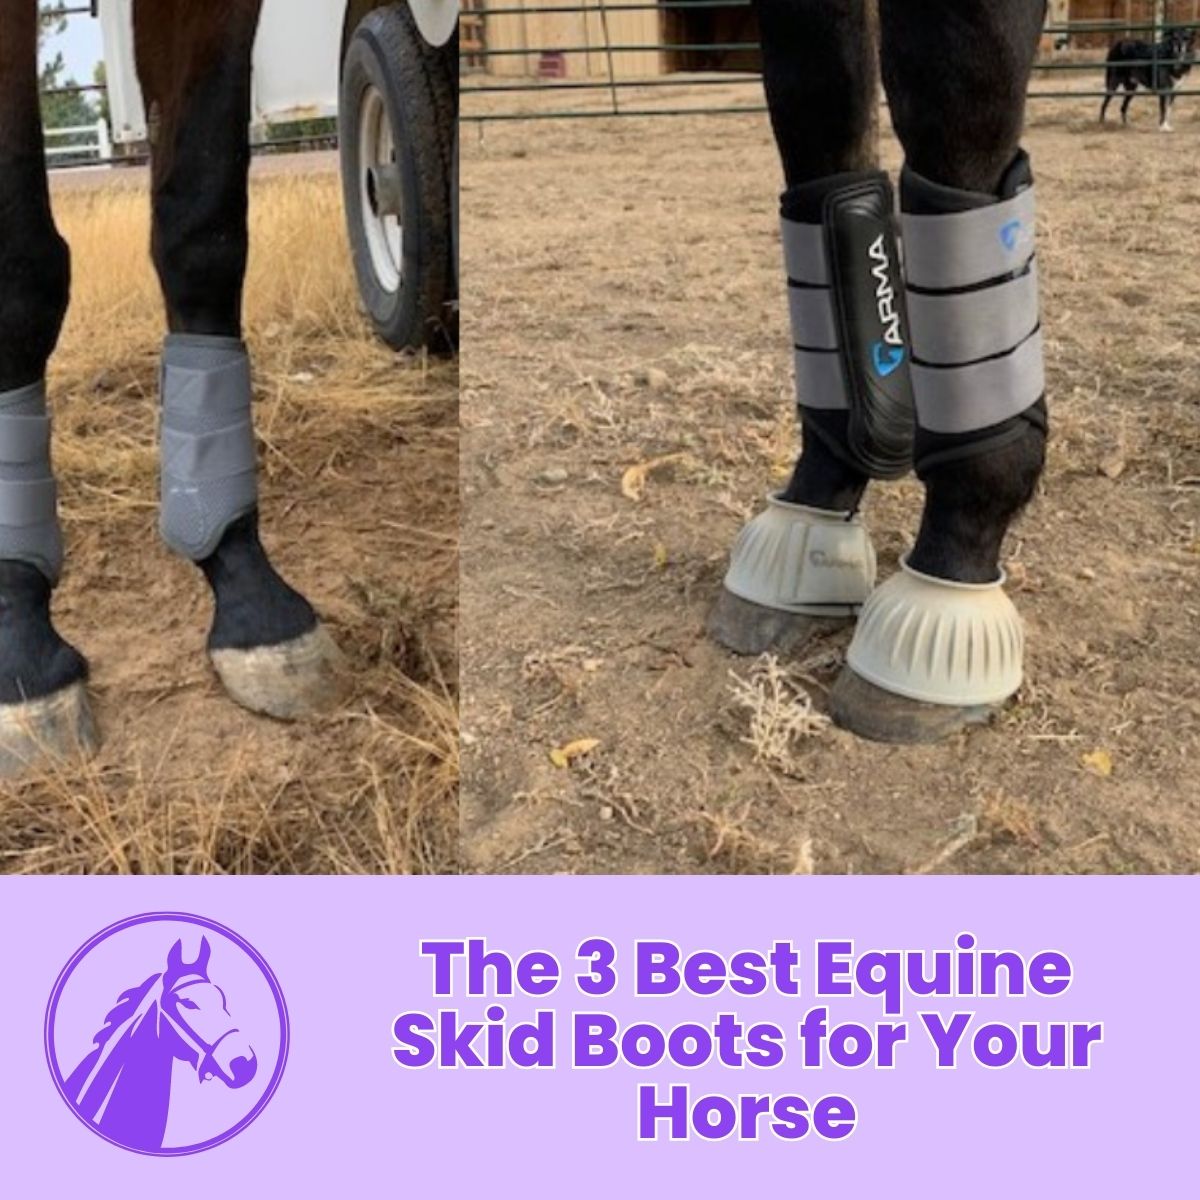 You are currently viewing The 3 Best Equine Skid Boots for Your Horse